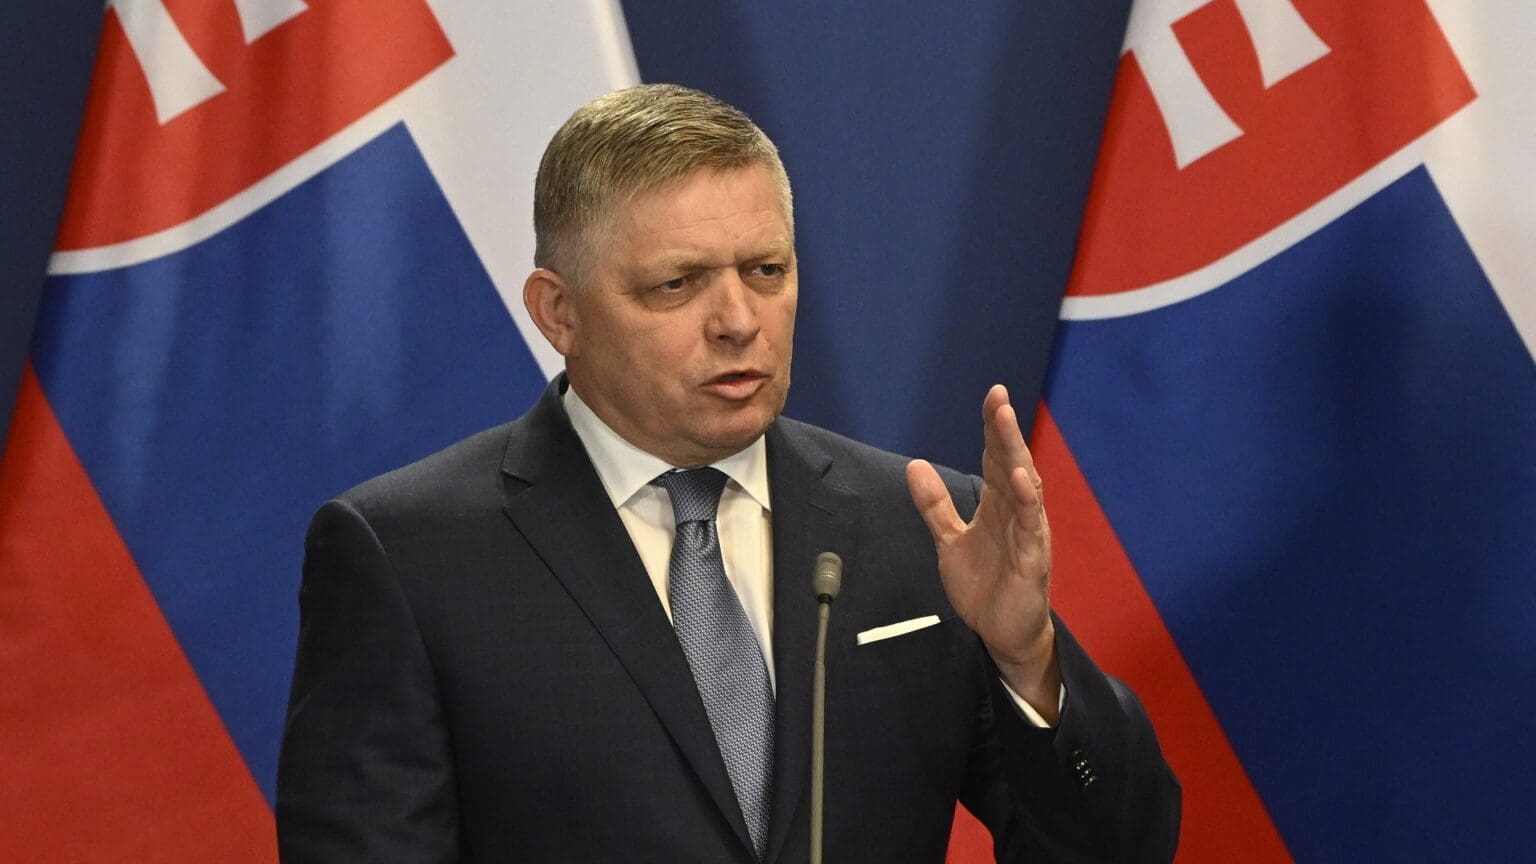 Fico’s Small Intestine Shot Through Five Times — Previously Undisclosed Details About the Assassination Attempt Against the Slovak PM Revealed